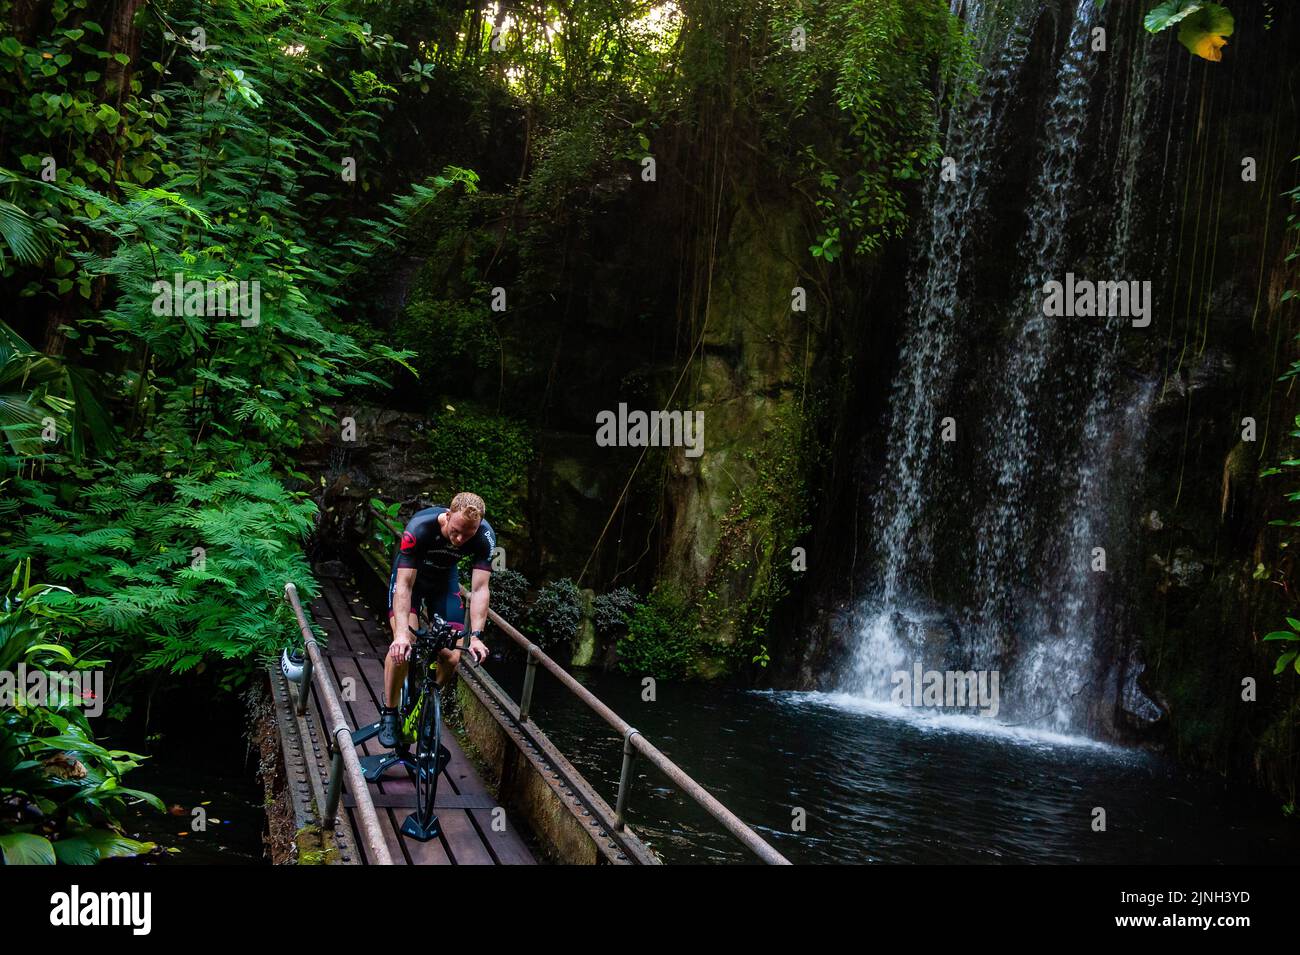 Athlete Olaf Van Den Bergh seen training on his bike in front of a waterfall. Dutch top athlete Olaf Van Den Bergh starts training in the indoor tropical rainforest of the Burgers' Zoo in Arnhem, in preparation for the Ironman World Championships in Kailua-Kona located in Hawaii. The Bush (indoor tropical rainforest) is the ideal training location because of the high humidity and temperature. (Photo by Ana Fernandez / SOPA Images/Sipa USA) Stock Photo